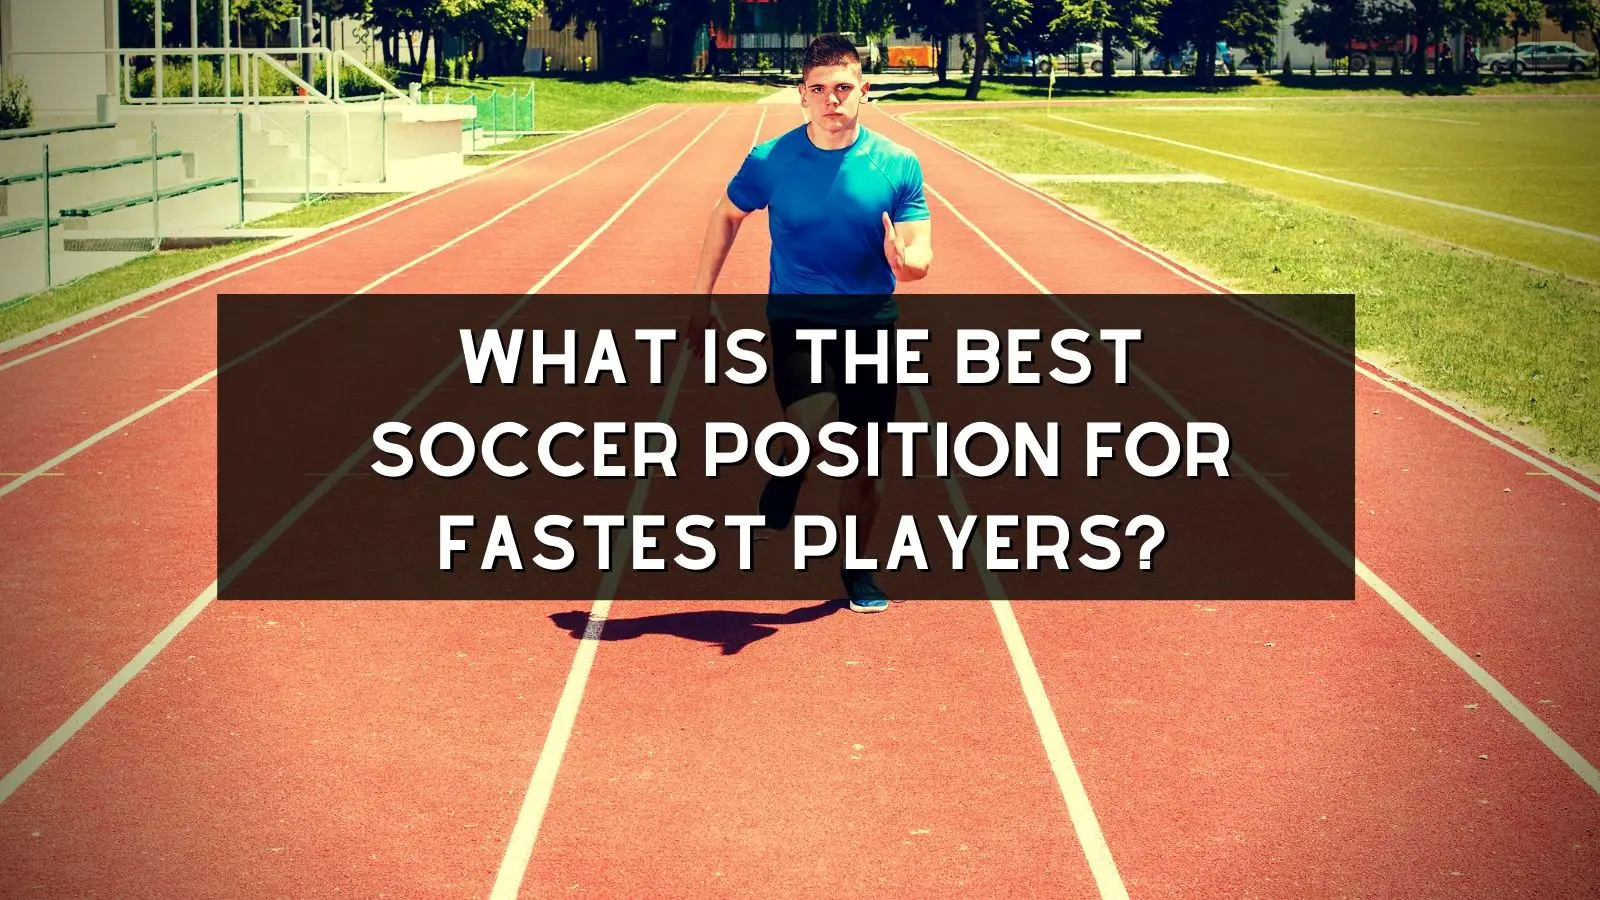 The Best Soccer Position for Fast Players: Why Athletes Make Great Soccer Players